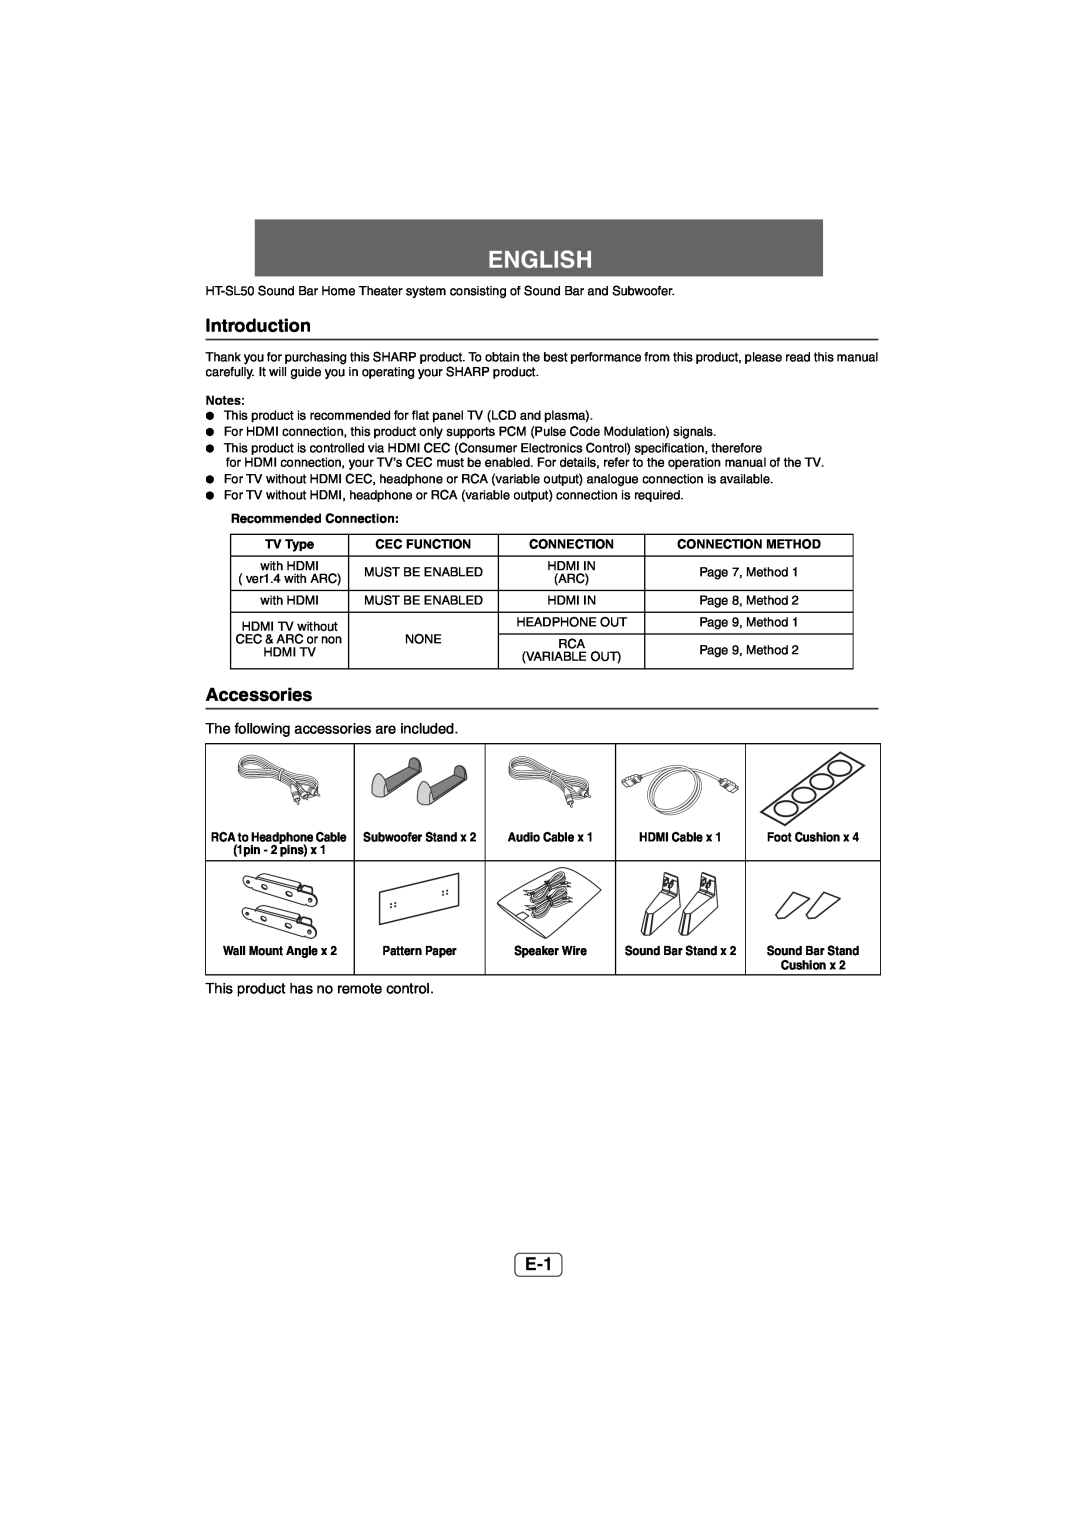 Sharp HT-SL50 operation manual Introduction, Accessories, English, The following accessories are included 